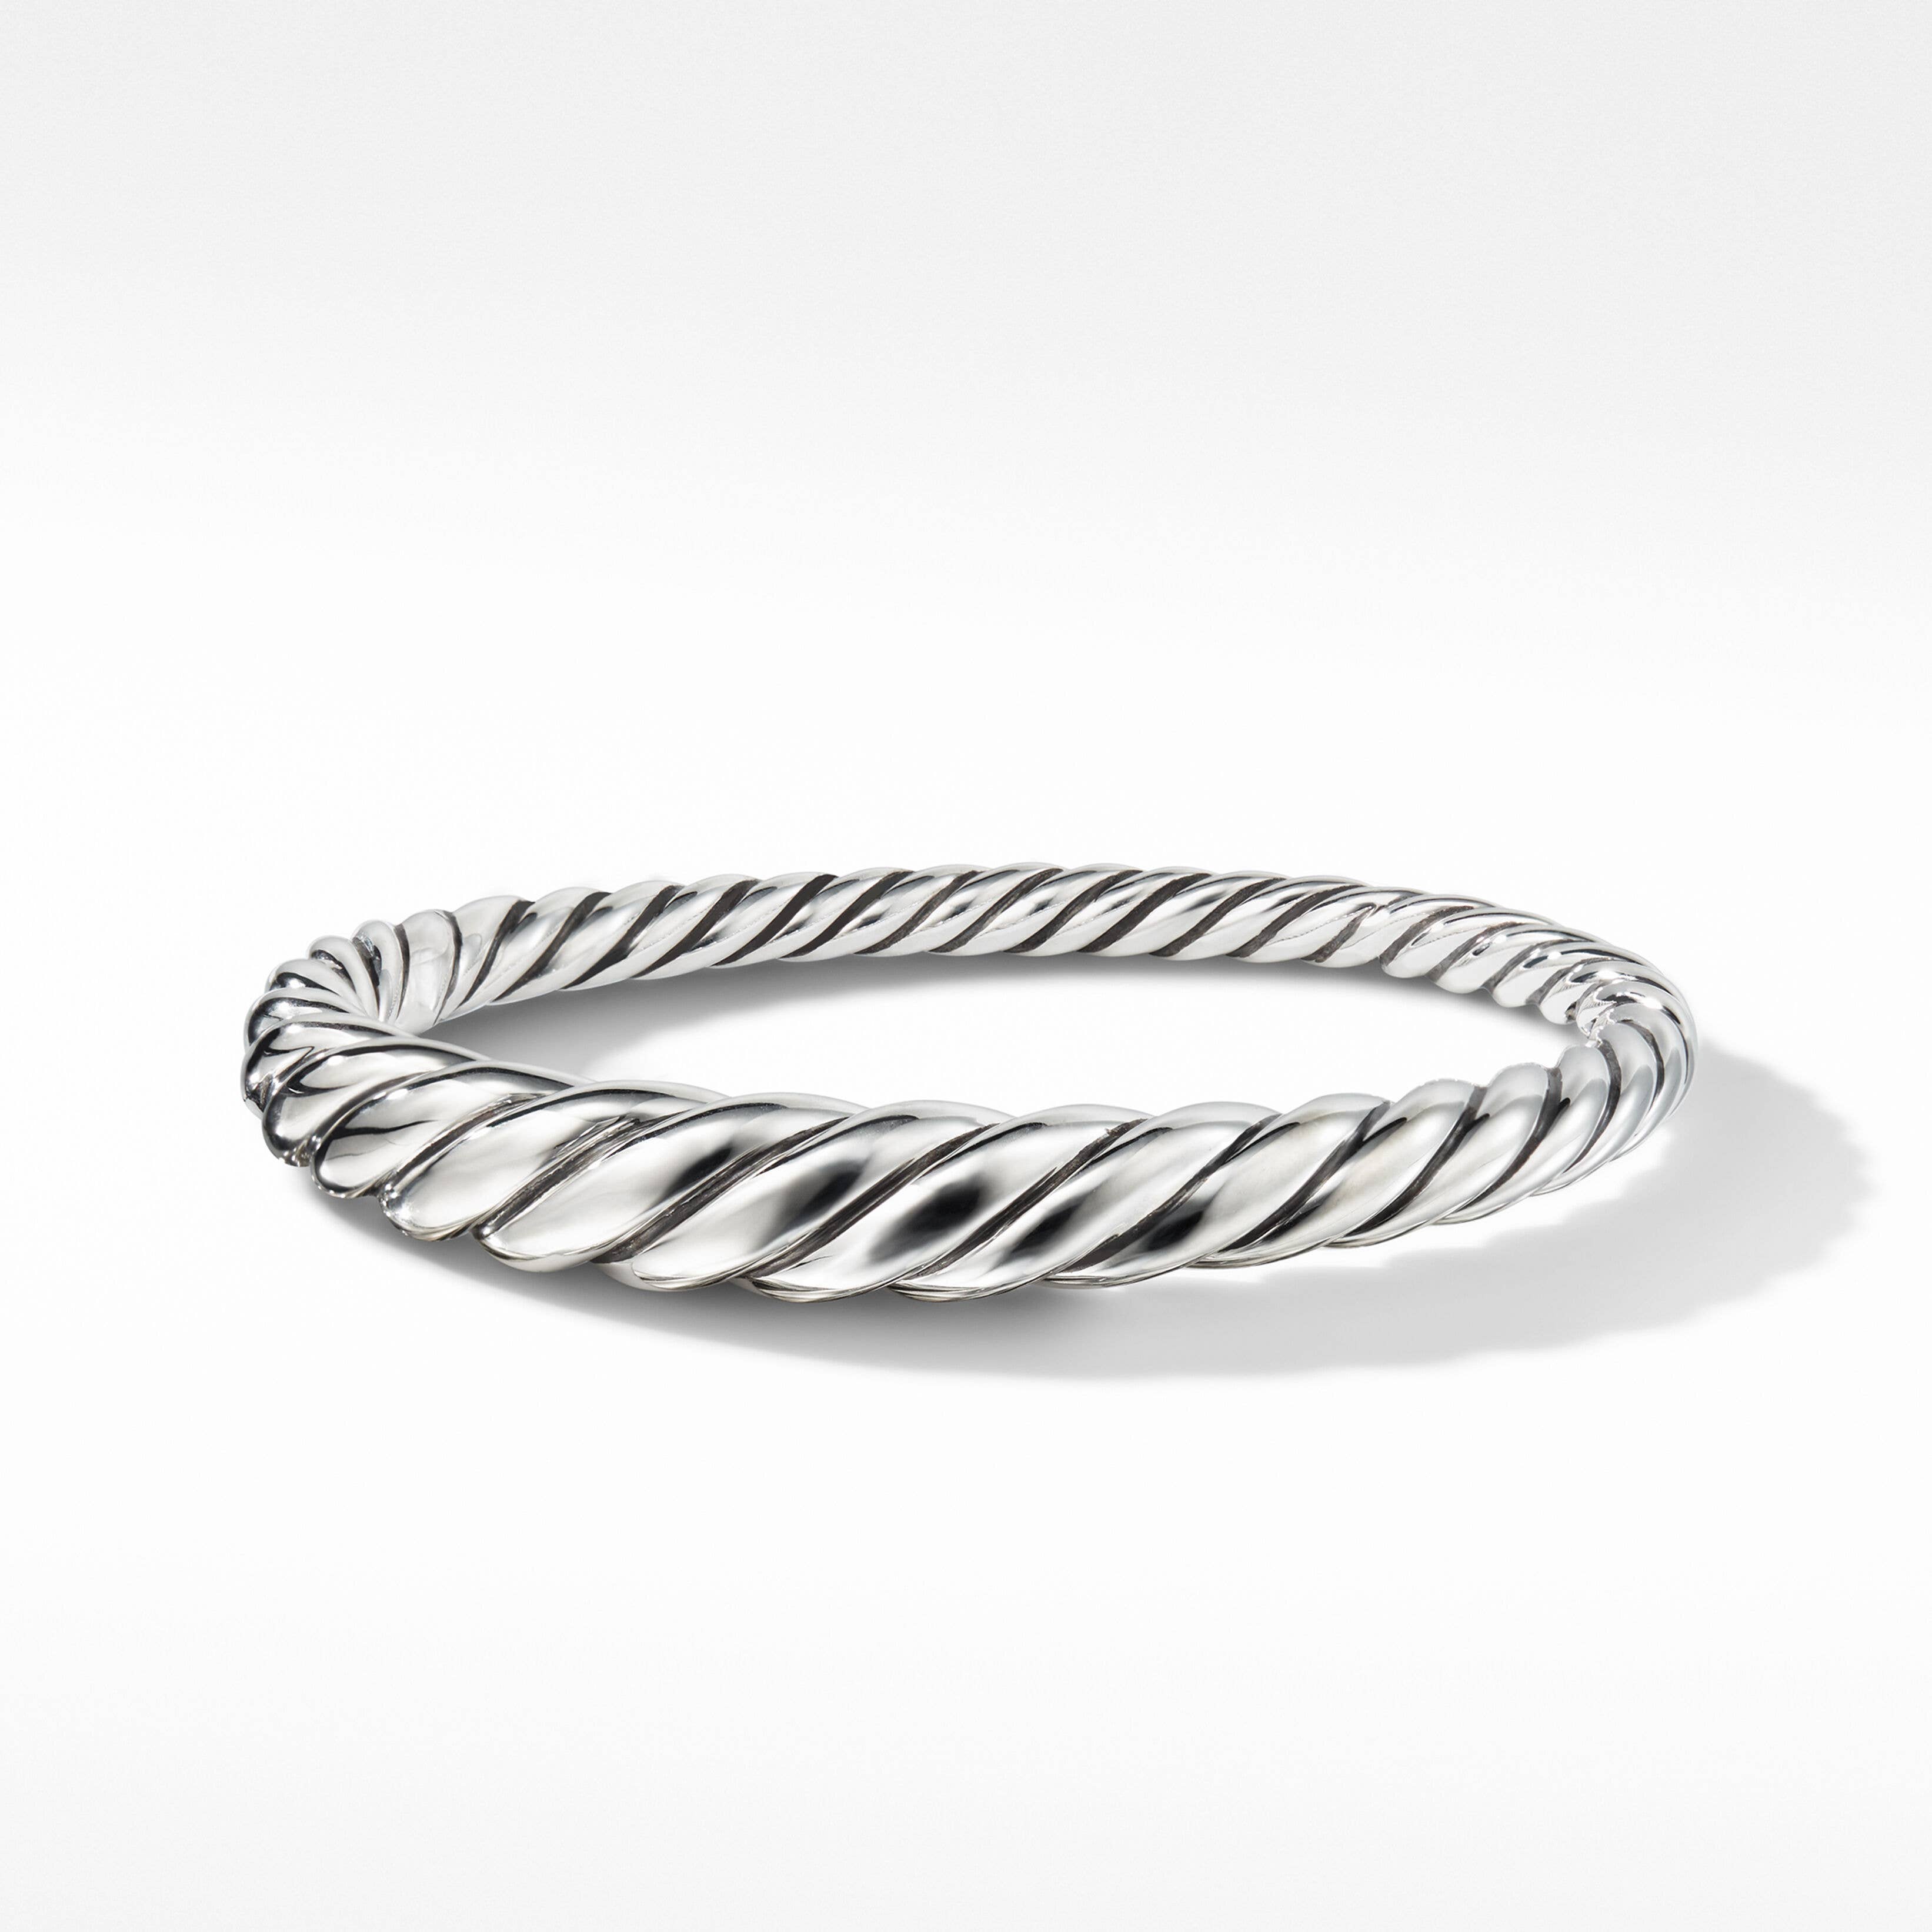 Pure Form® Cable Bracelet in Sterling Silver